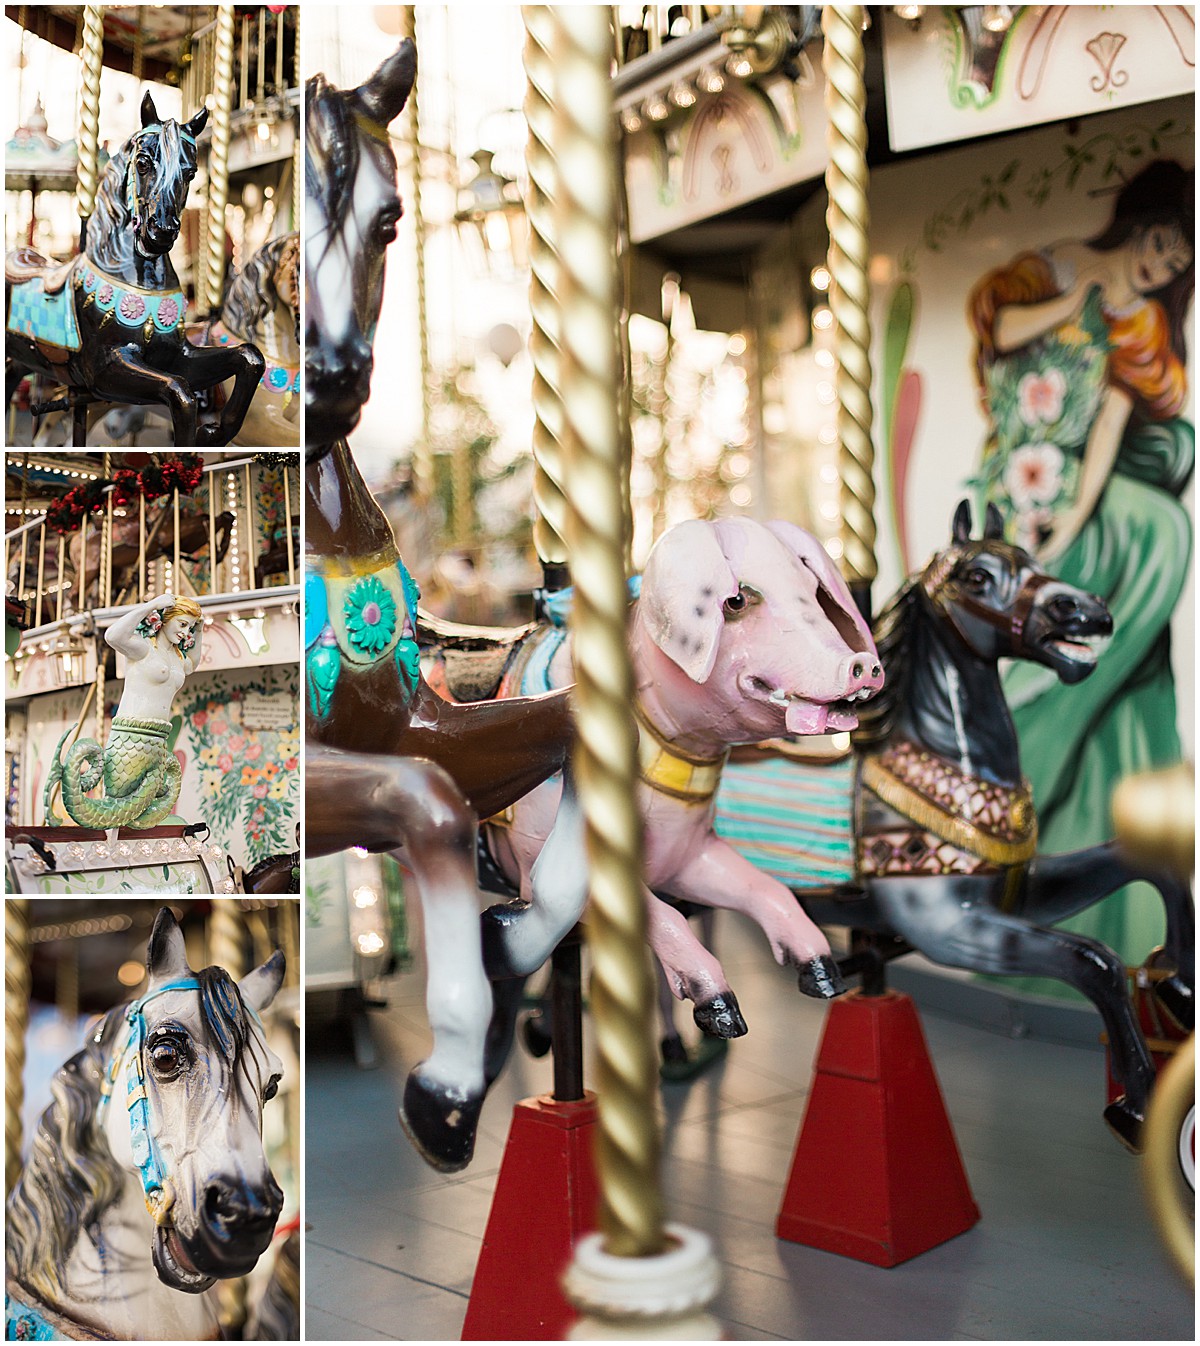 Old french carousel at Christmas village in Nantes details by Elena Usacheva Photographer 